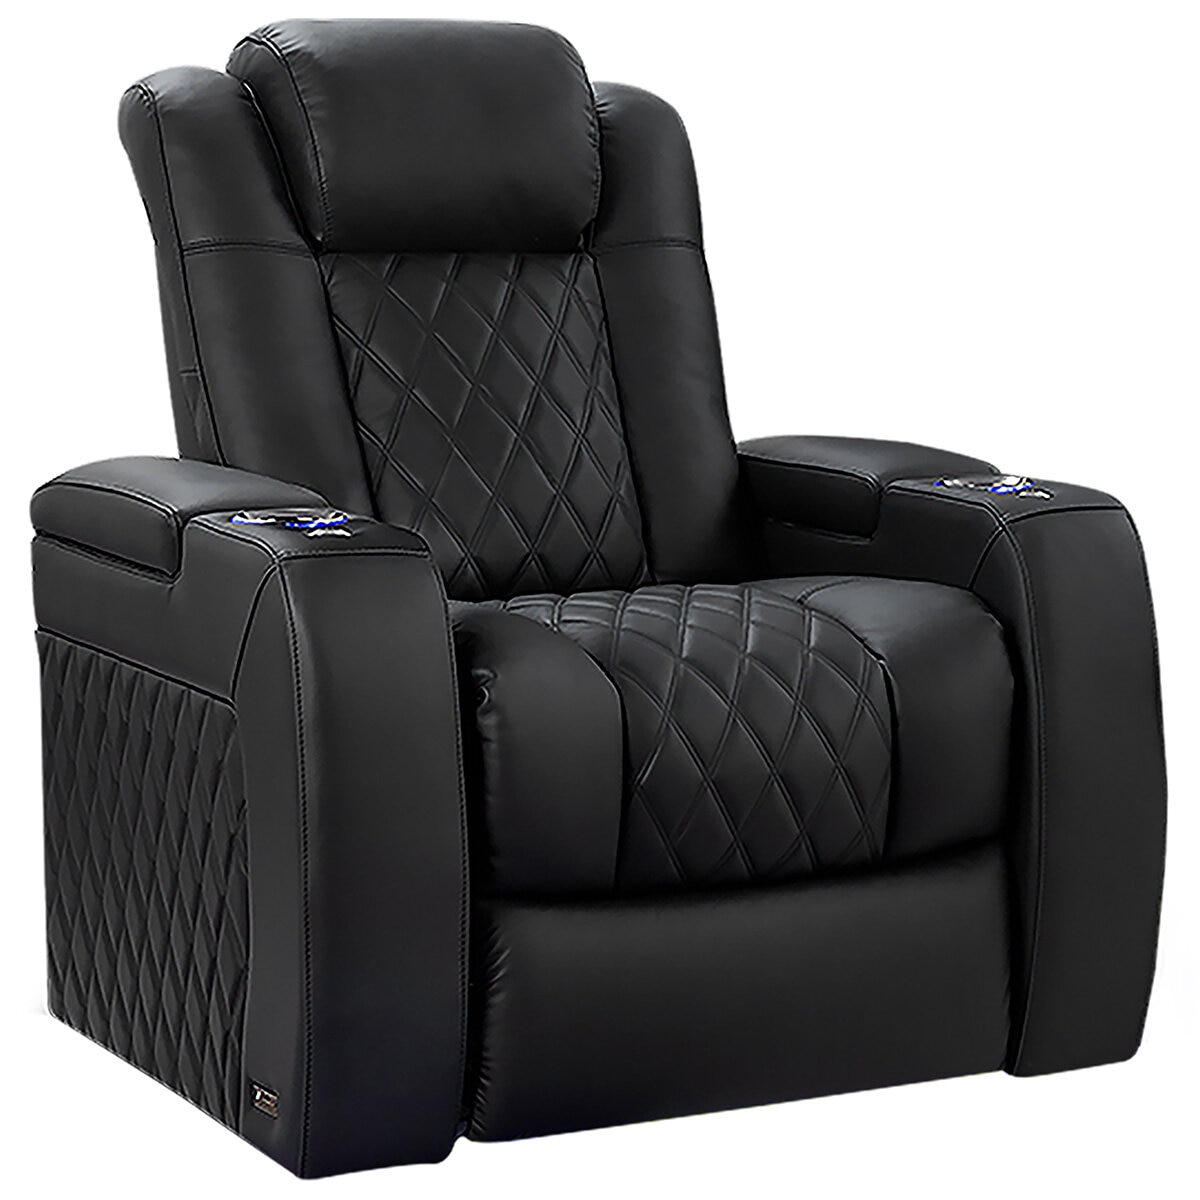 Tuscany Lux 1 Seater